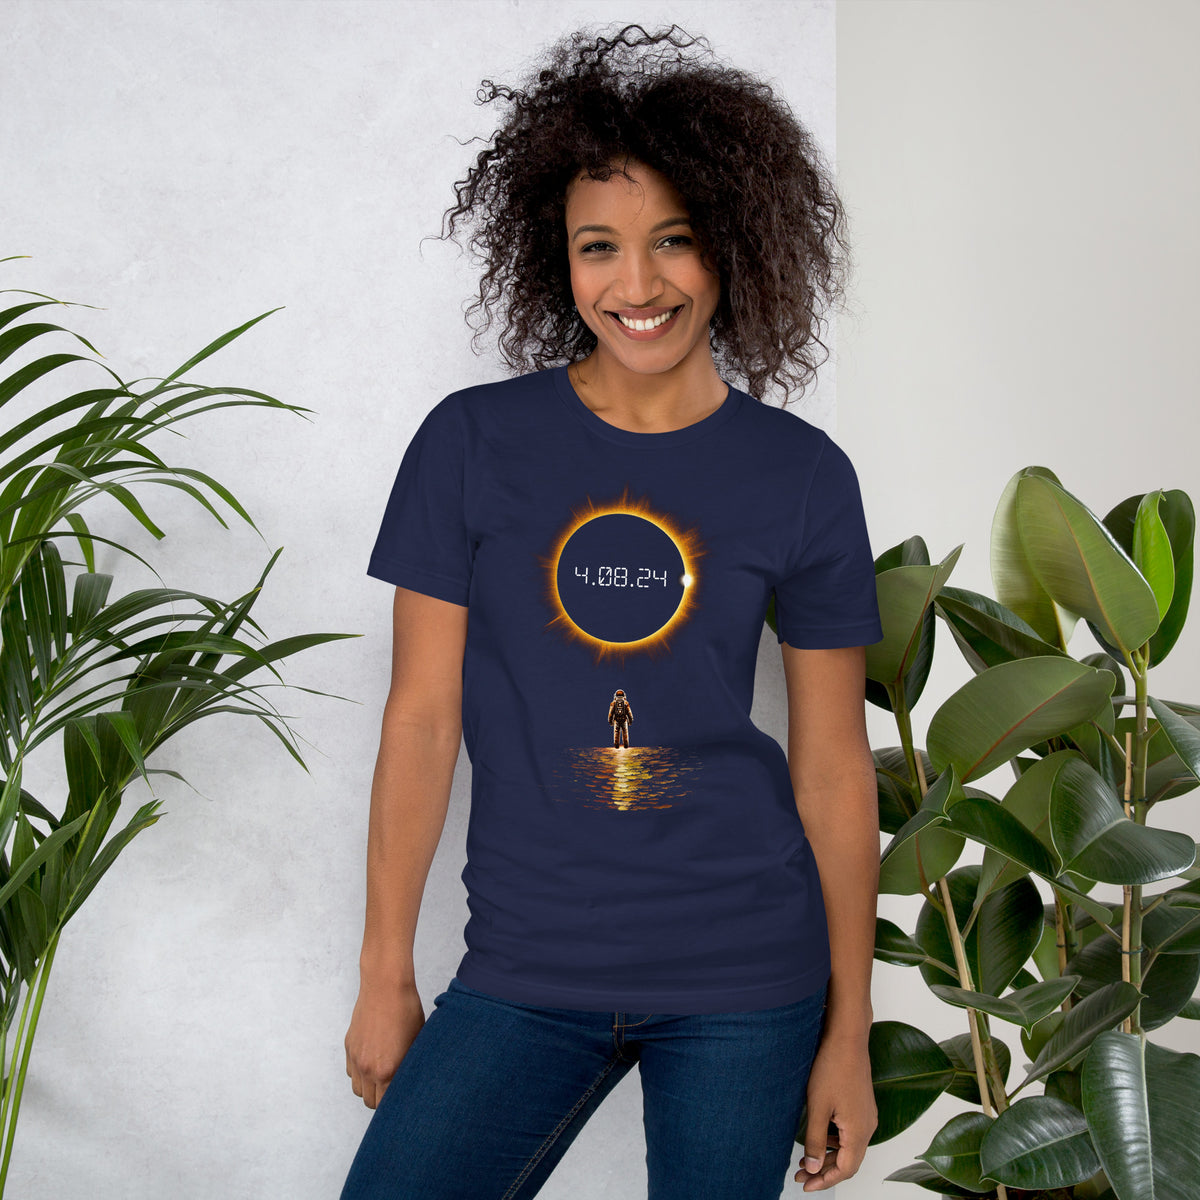 Total Solar Eclipse Shirt April 8th 2024 - America Totality - Astronomy Science Moon Space